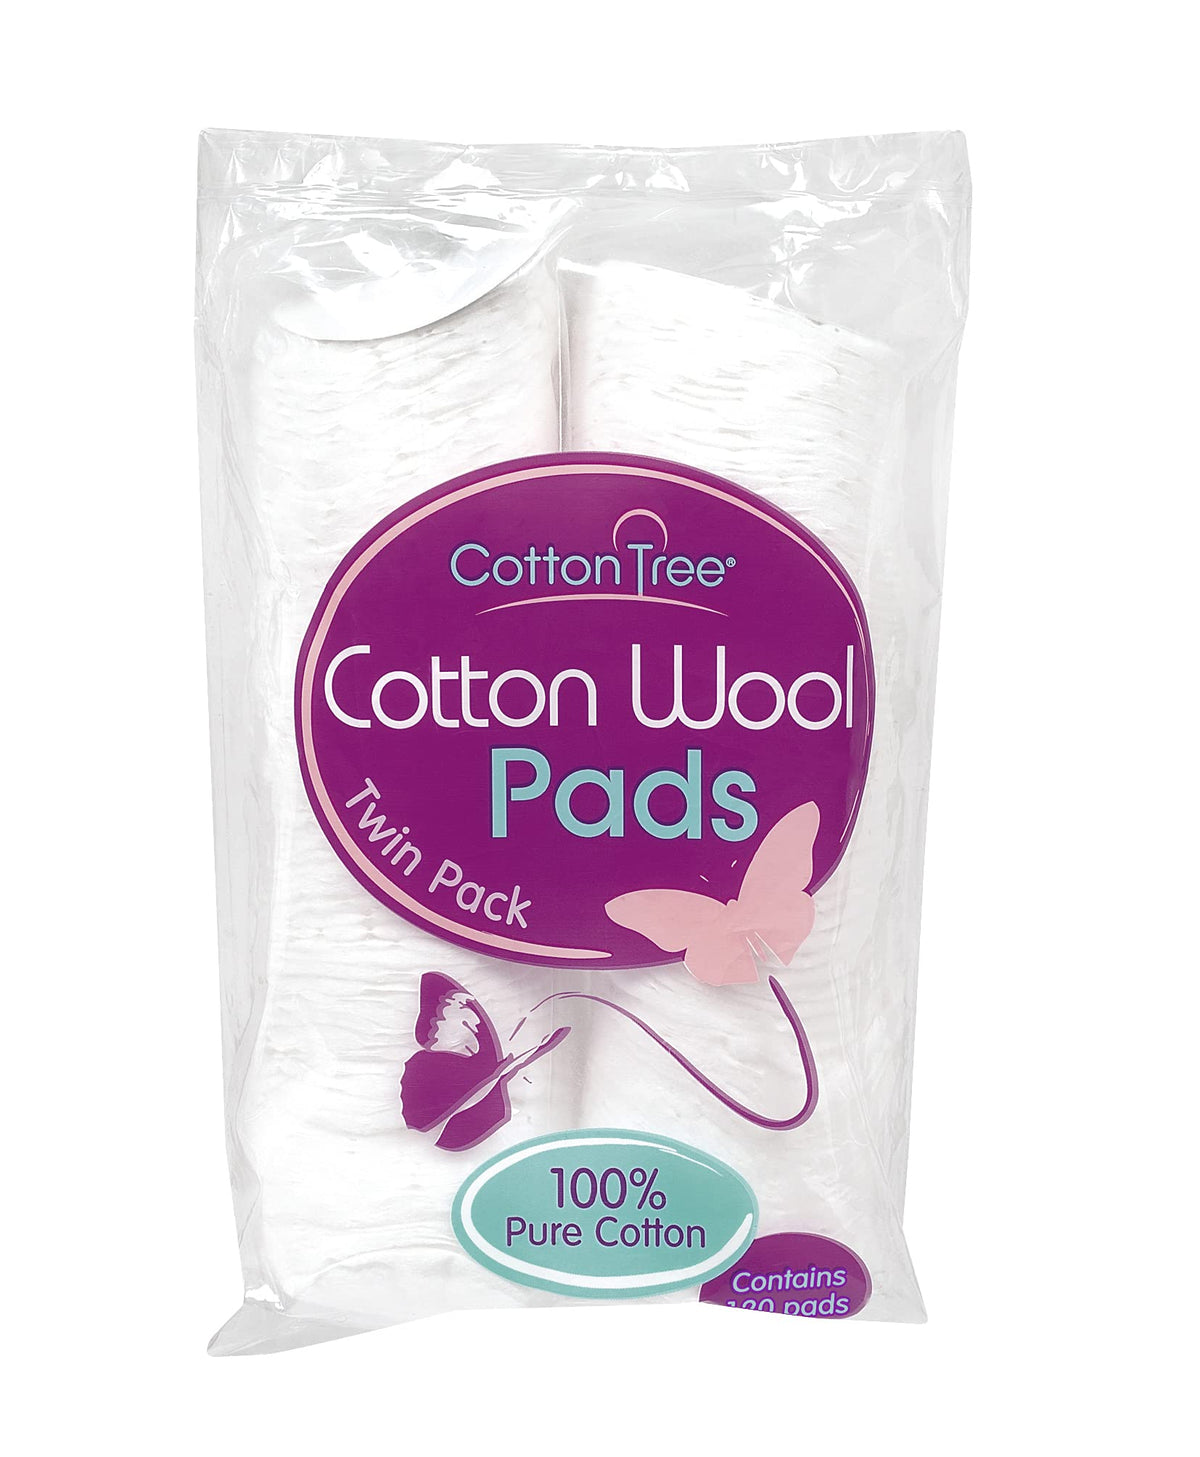 Cotton Tree Round Cotton Wool Pads 120 Pack Soft Fast Postage